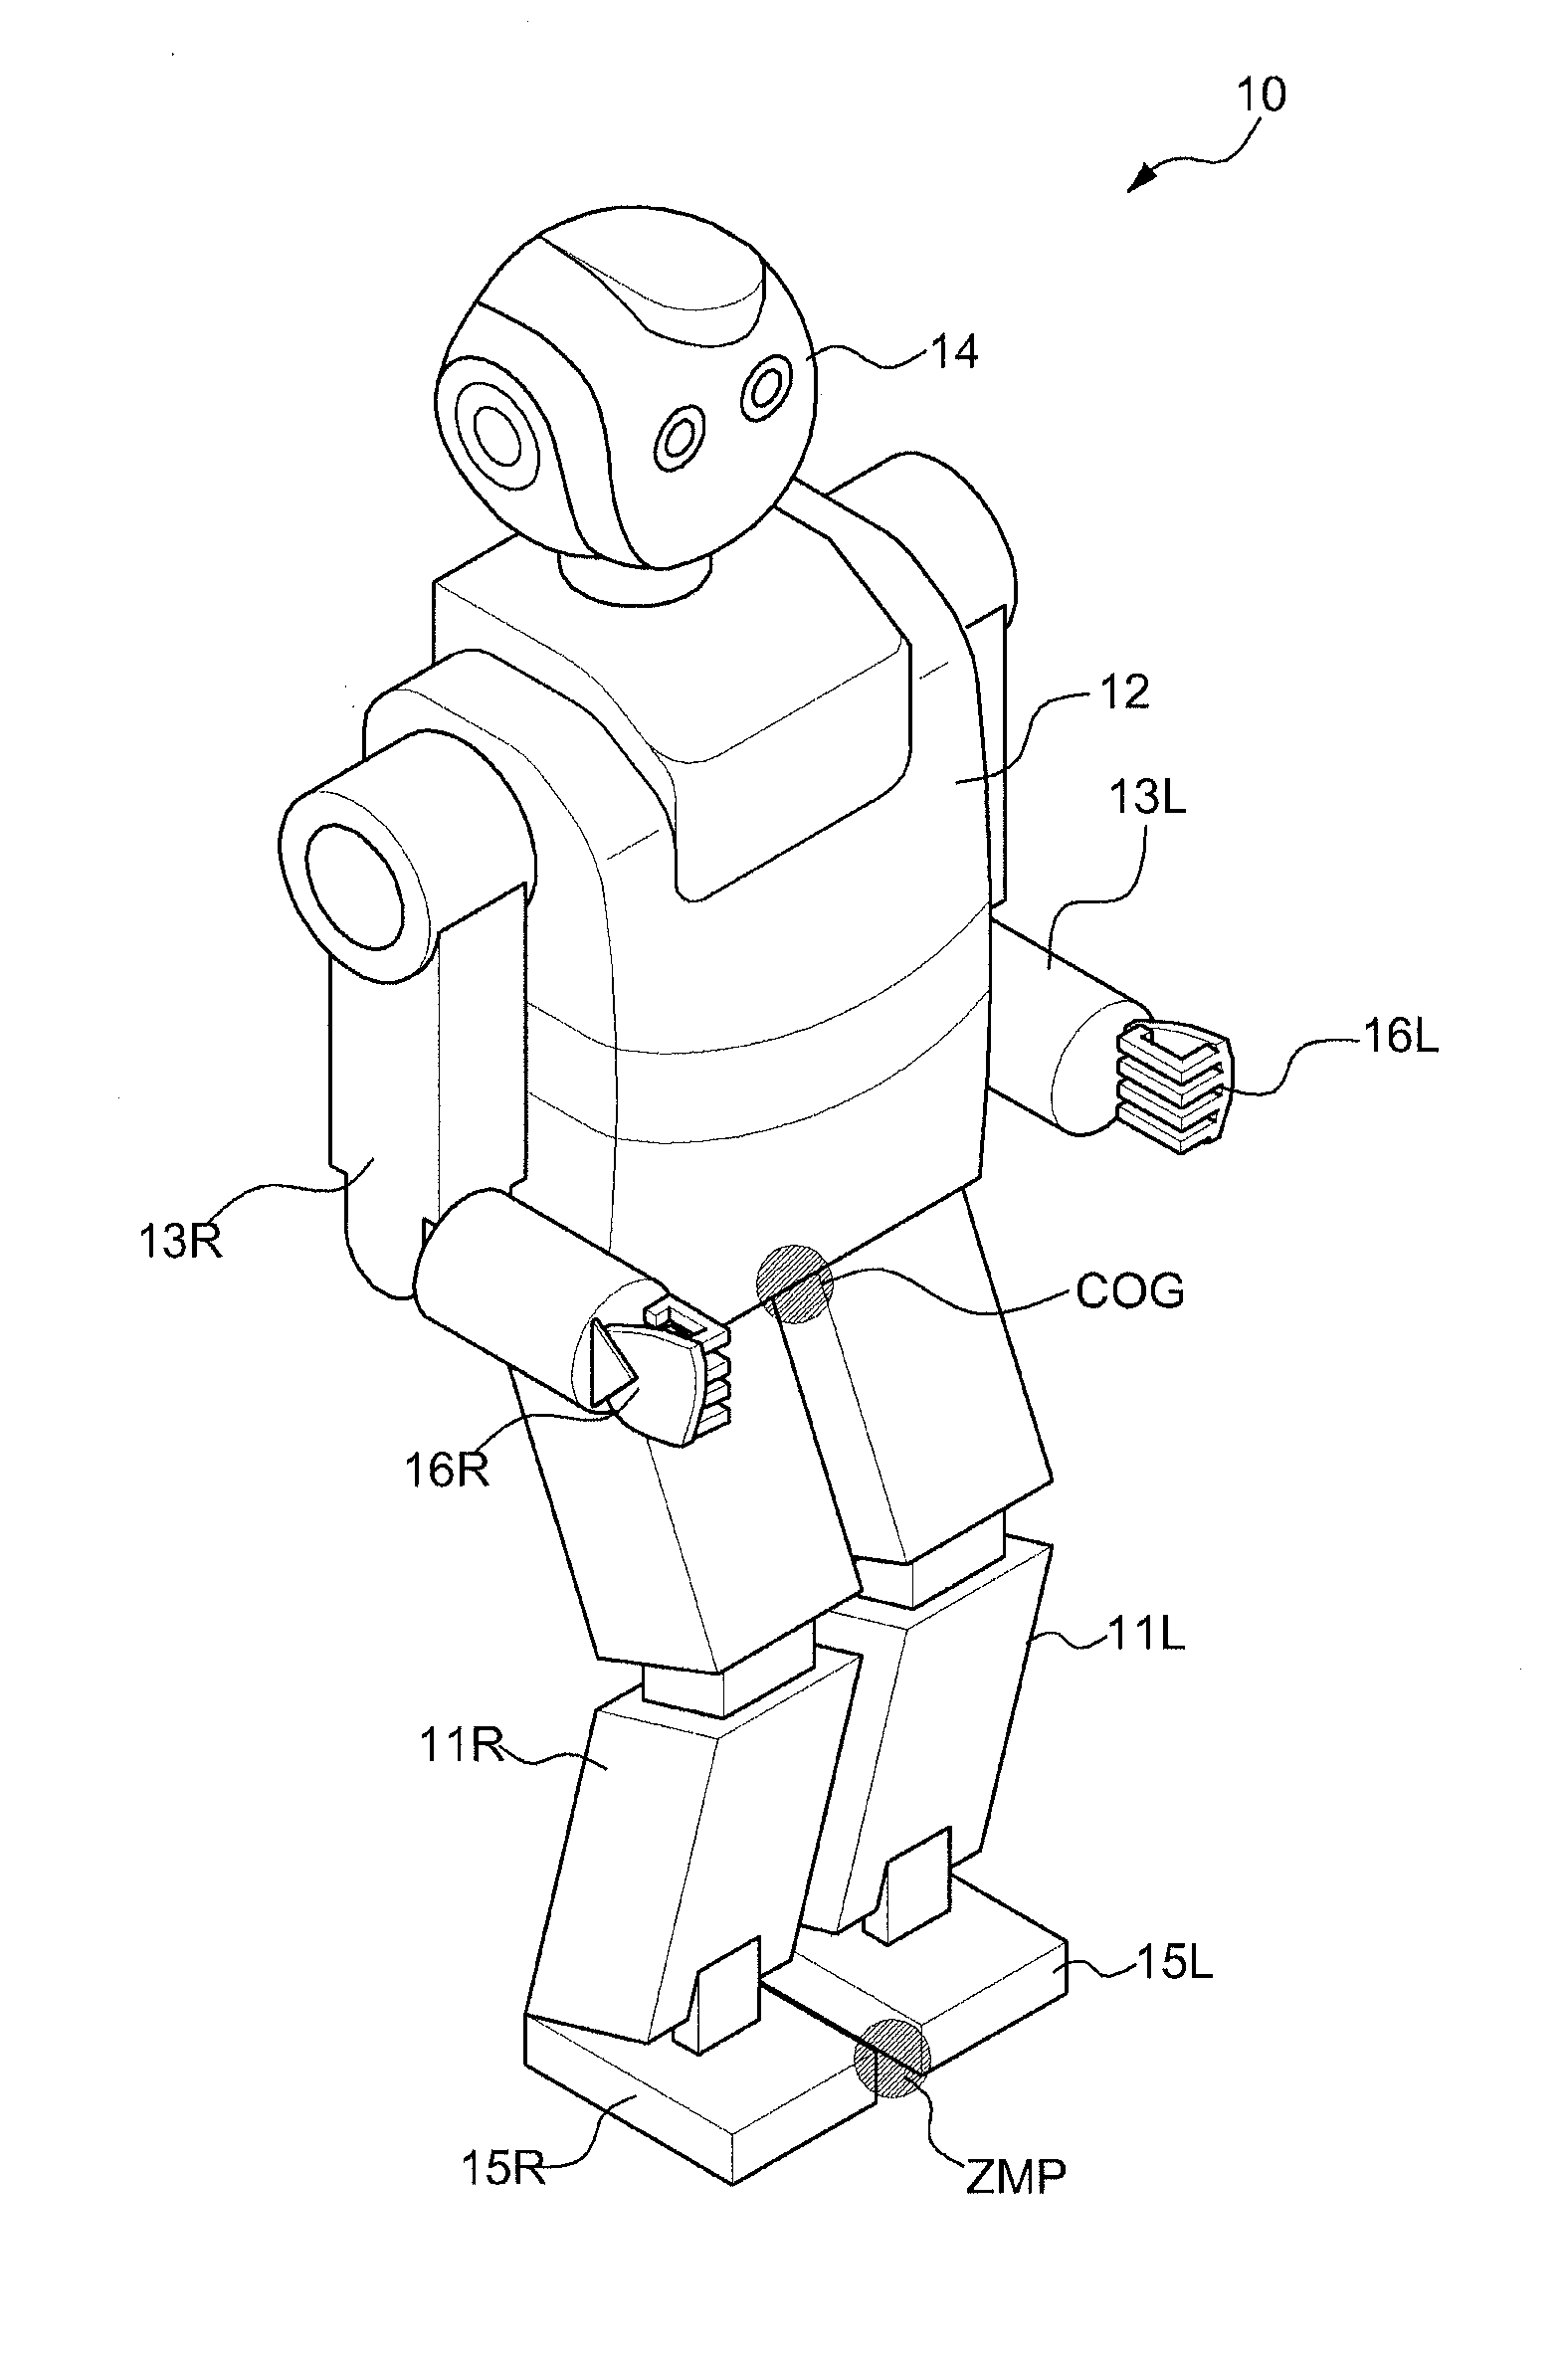 Apparatus and method controlling legged mobile robot